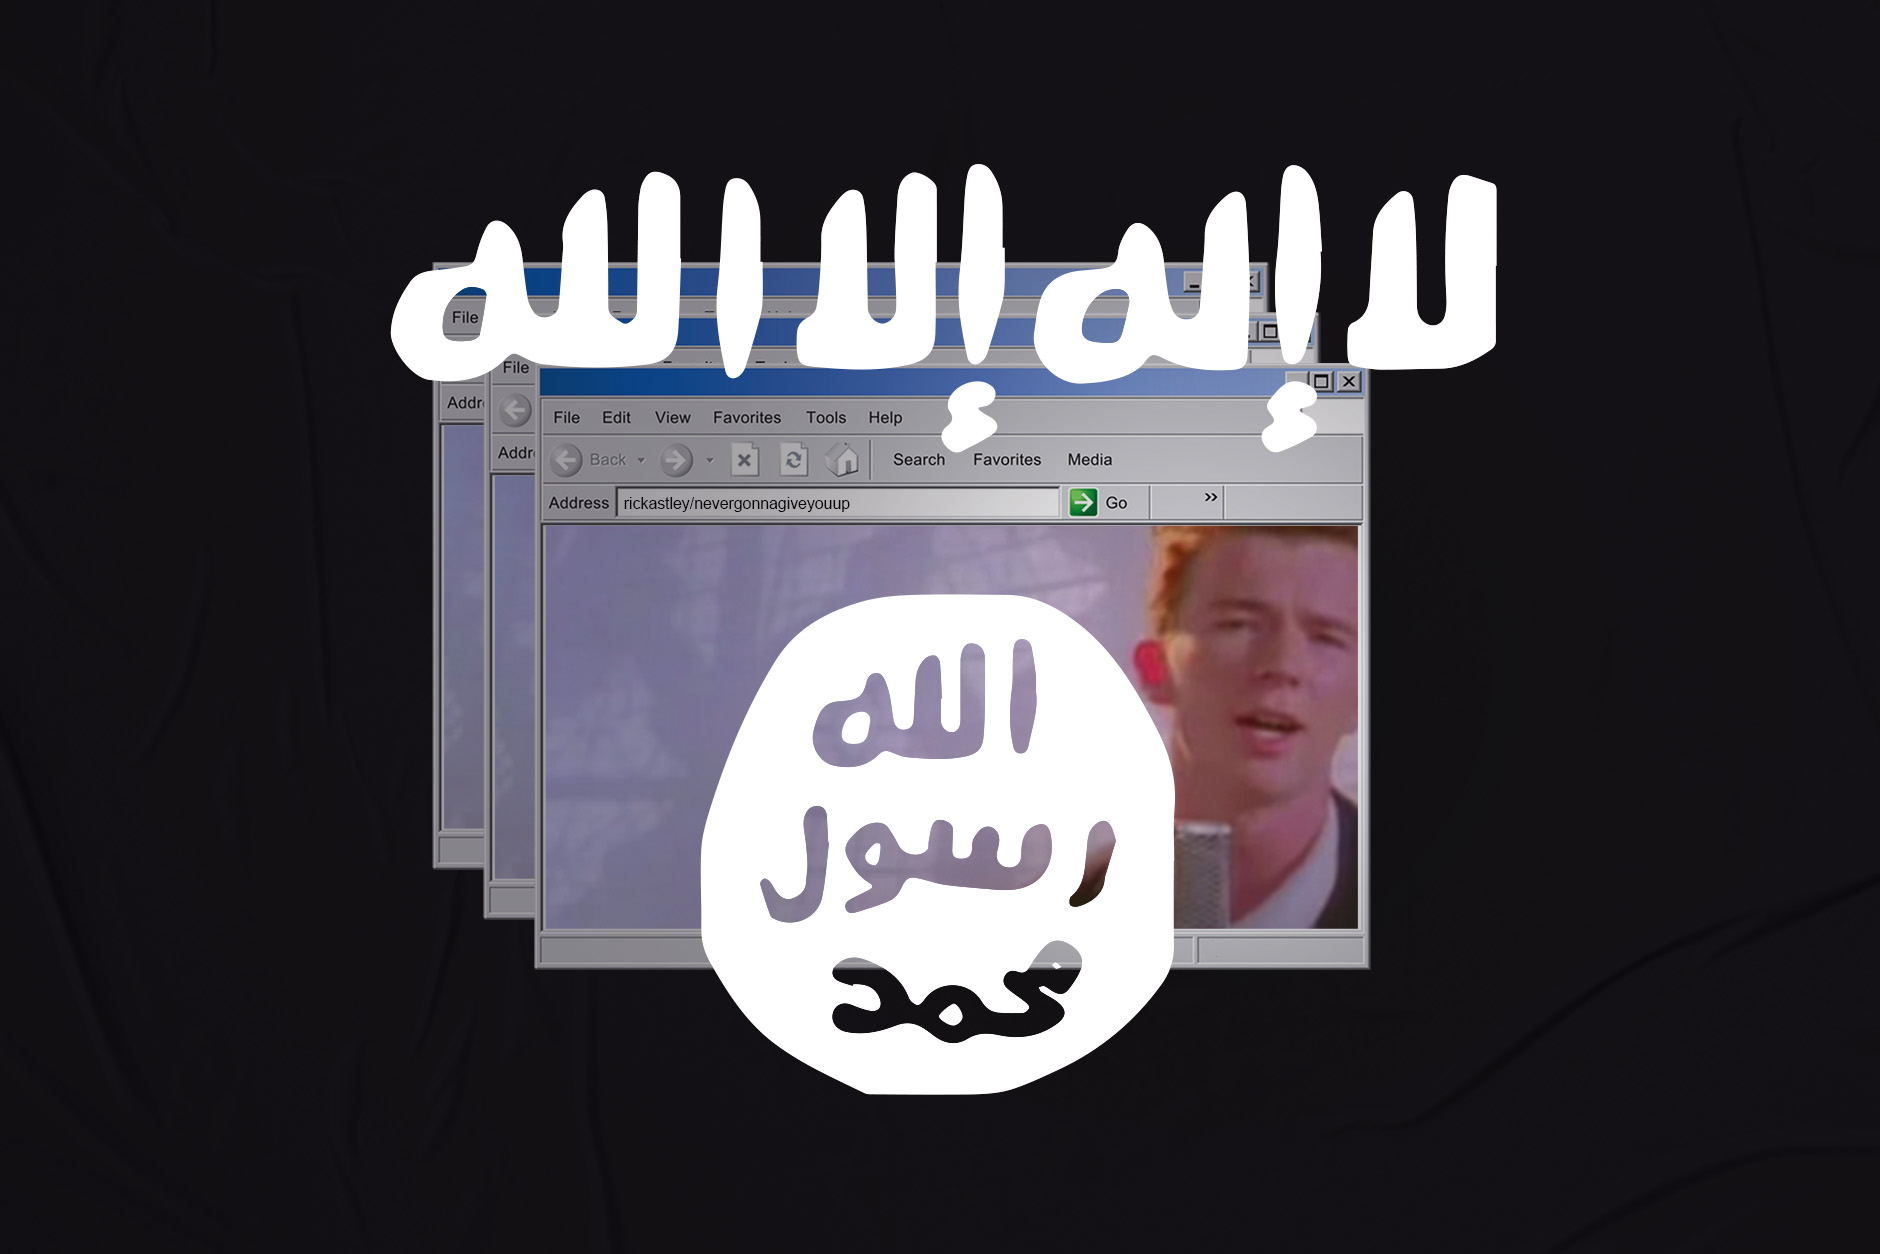 How Australian cyber spies used 'Rickrolling' to disrupt Islamic